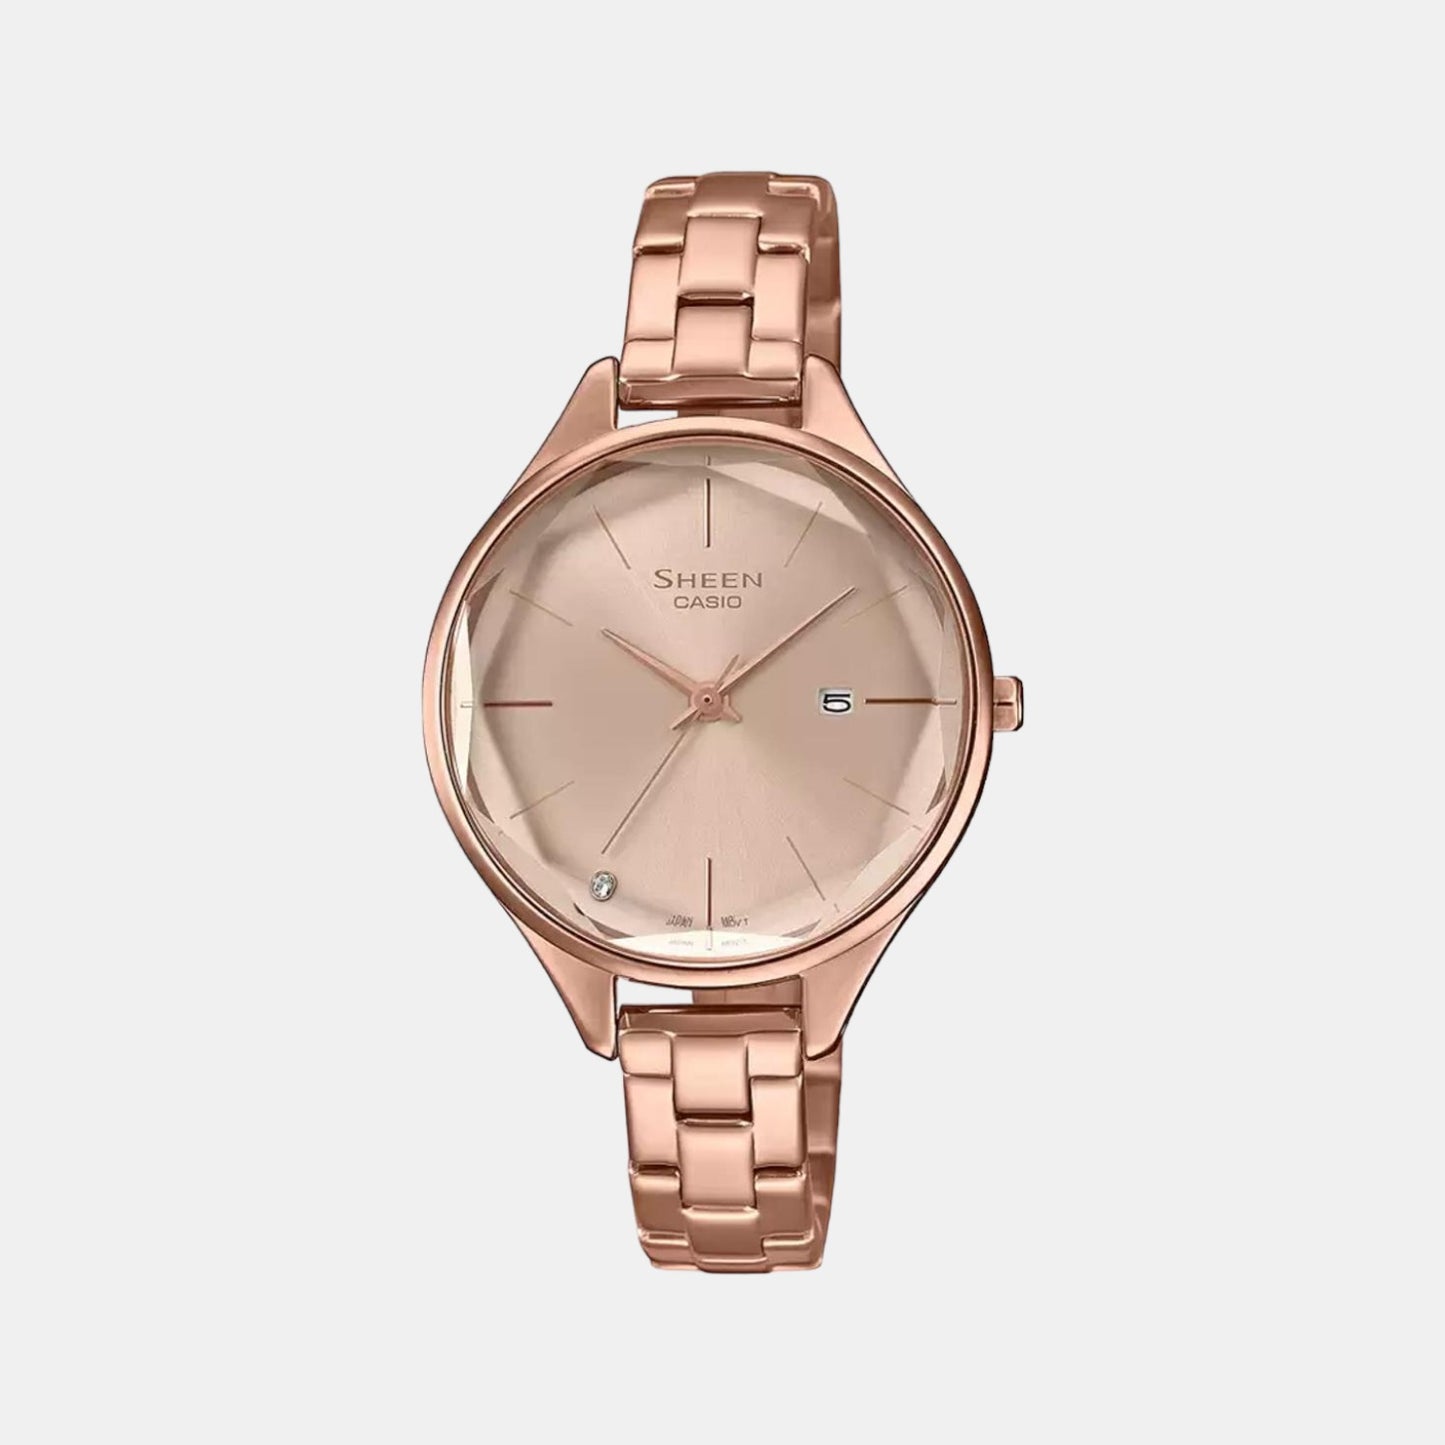 casio-stainless-steel-pink-gold-analog-womens-watch-watch-sh252